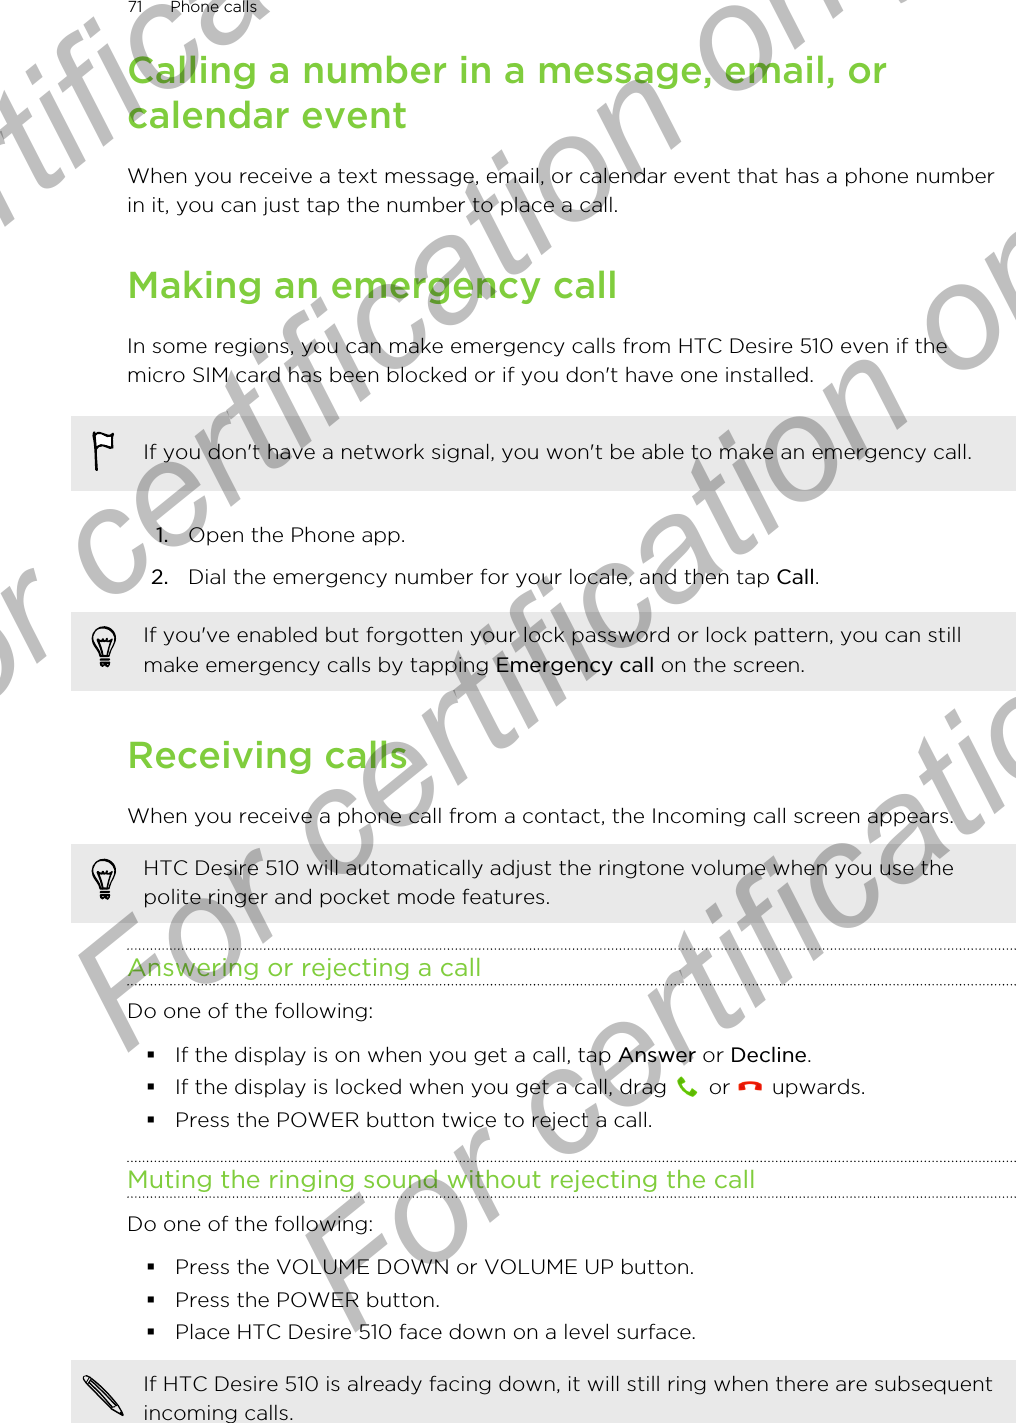 Calling a number in a message, email, orcalendar eventWhen you receive a text message, email, or calendar event that has a phone numberin it, you can just tap the number to place a call.Making an emergency callIn some regions, you can make emergency calls from HTC Desire 510 even if themicro SIM card has been blocked or if you don&apos;t have one installed.If you don&apos;t have a network signal, you won&apos;t be able to make an emergency call.1. Open the Phone app.2. Dial the emergency number for your locale, and then tap Call.If you&apos;ve enabled but forgotten your lock password or lock pattern, you can stillmake emergency calls by tapping Emergency call on the screen.Receiving callsWhen you receive a phone call from a contact, the Incoming call screen appears.HTC Desire 510 will automatically adjust the ringtone volume when you use thepolite ringer and pocket mode features.Answering or rejecting a callDo one of the following:§If the display is on when you get a call, tap Answer or Decline.§If the display is locked when you get a call, drag   or   upwards.§Press the POWER button twice to reject a call.Muting the ringing sound without rejecting the callDo one of the following:§Press the VOLUME DOWN or VOLUME UP button.§Press the POWER button.§Place HTC Desire 510 face down on a level surface.If HTC Desire 510 is already facing down, it will still ring when there are subsequentincoming calls.71 Phone callsFor certification  For certification only  For certification only  For certification only 